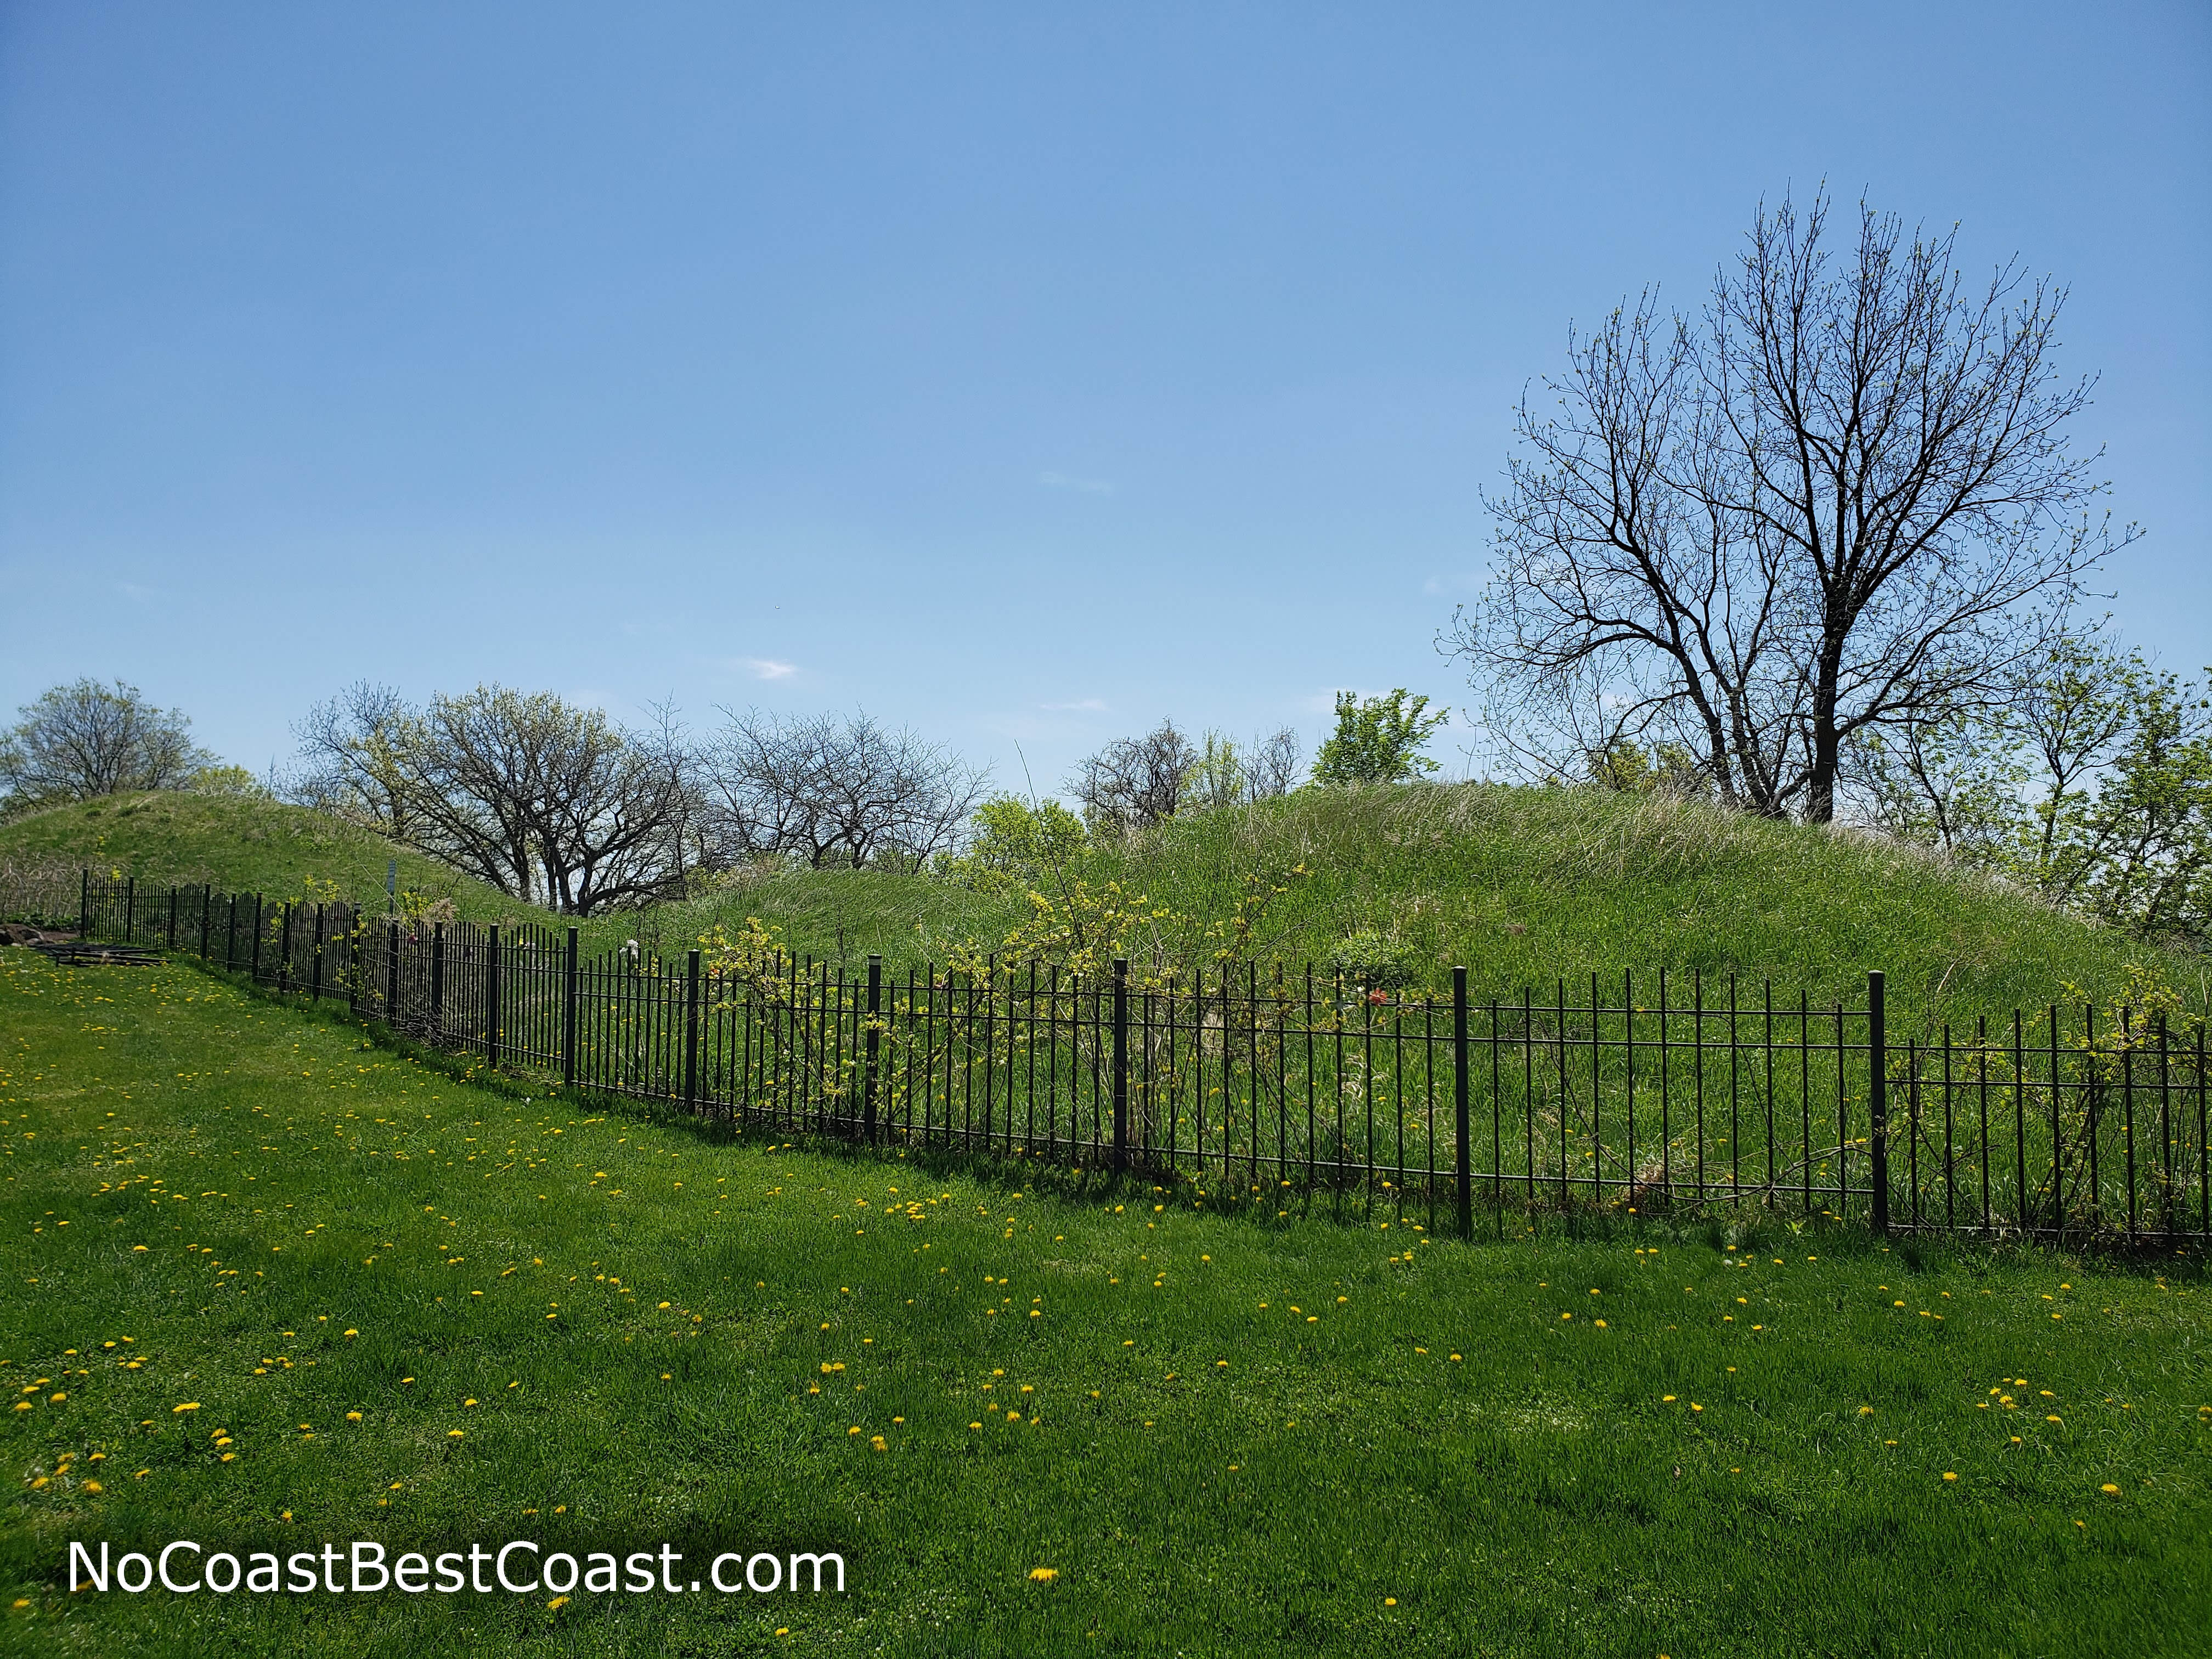 The grassy burial mounds in spring